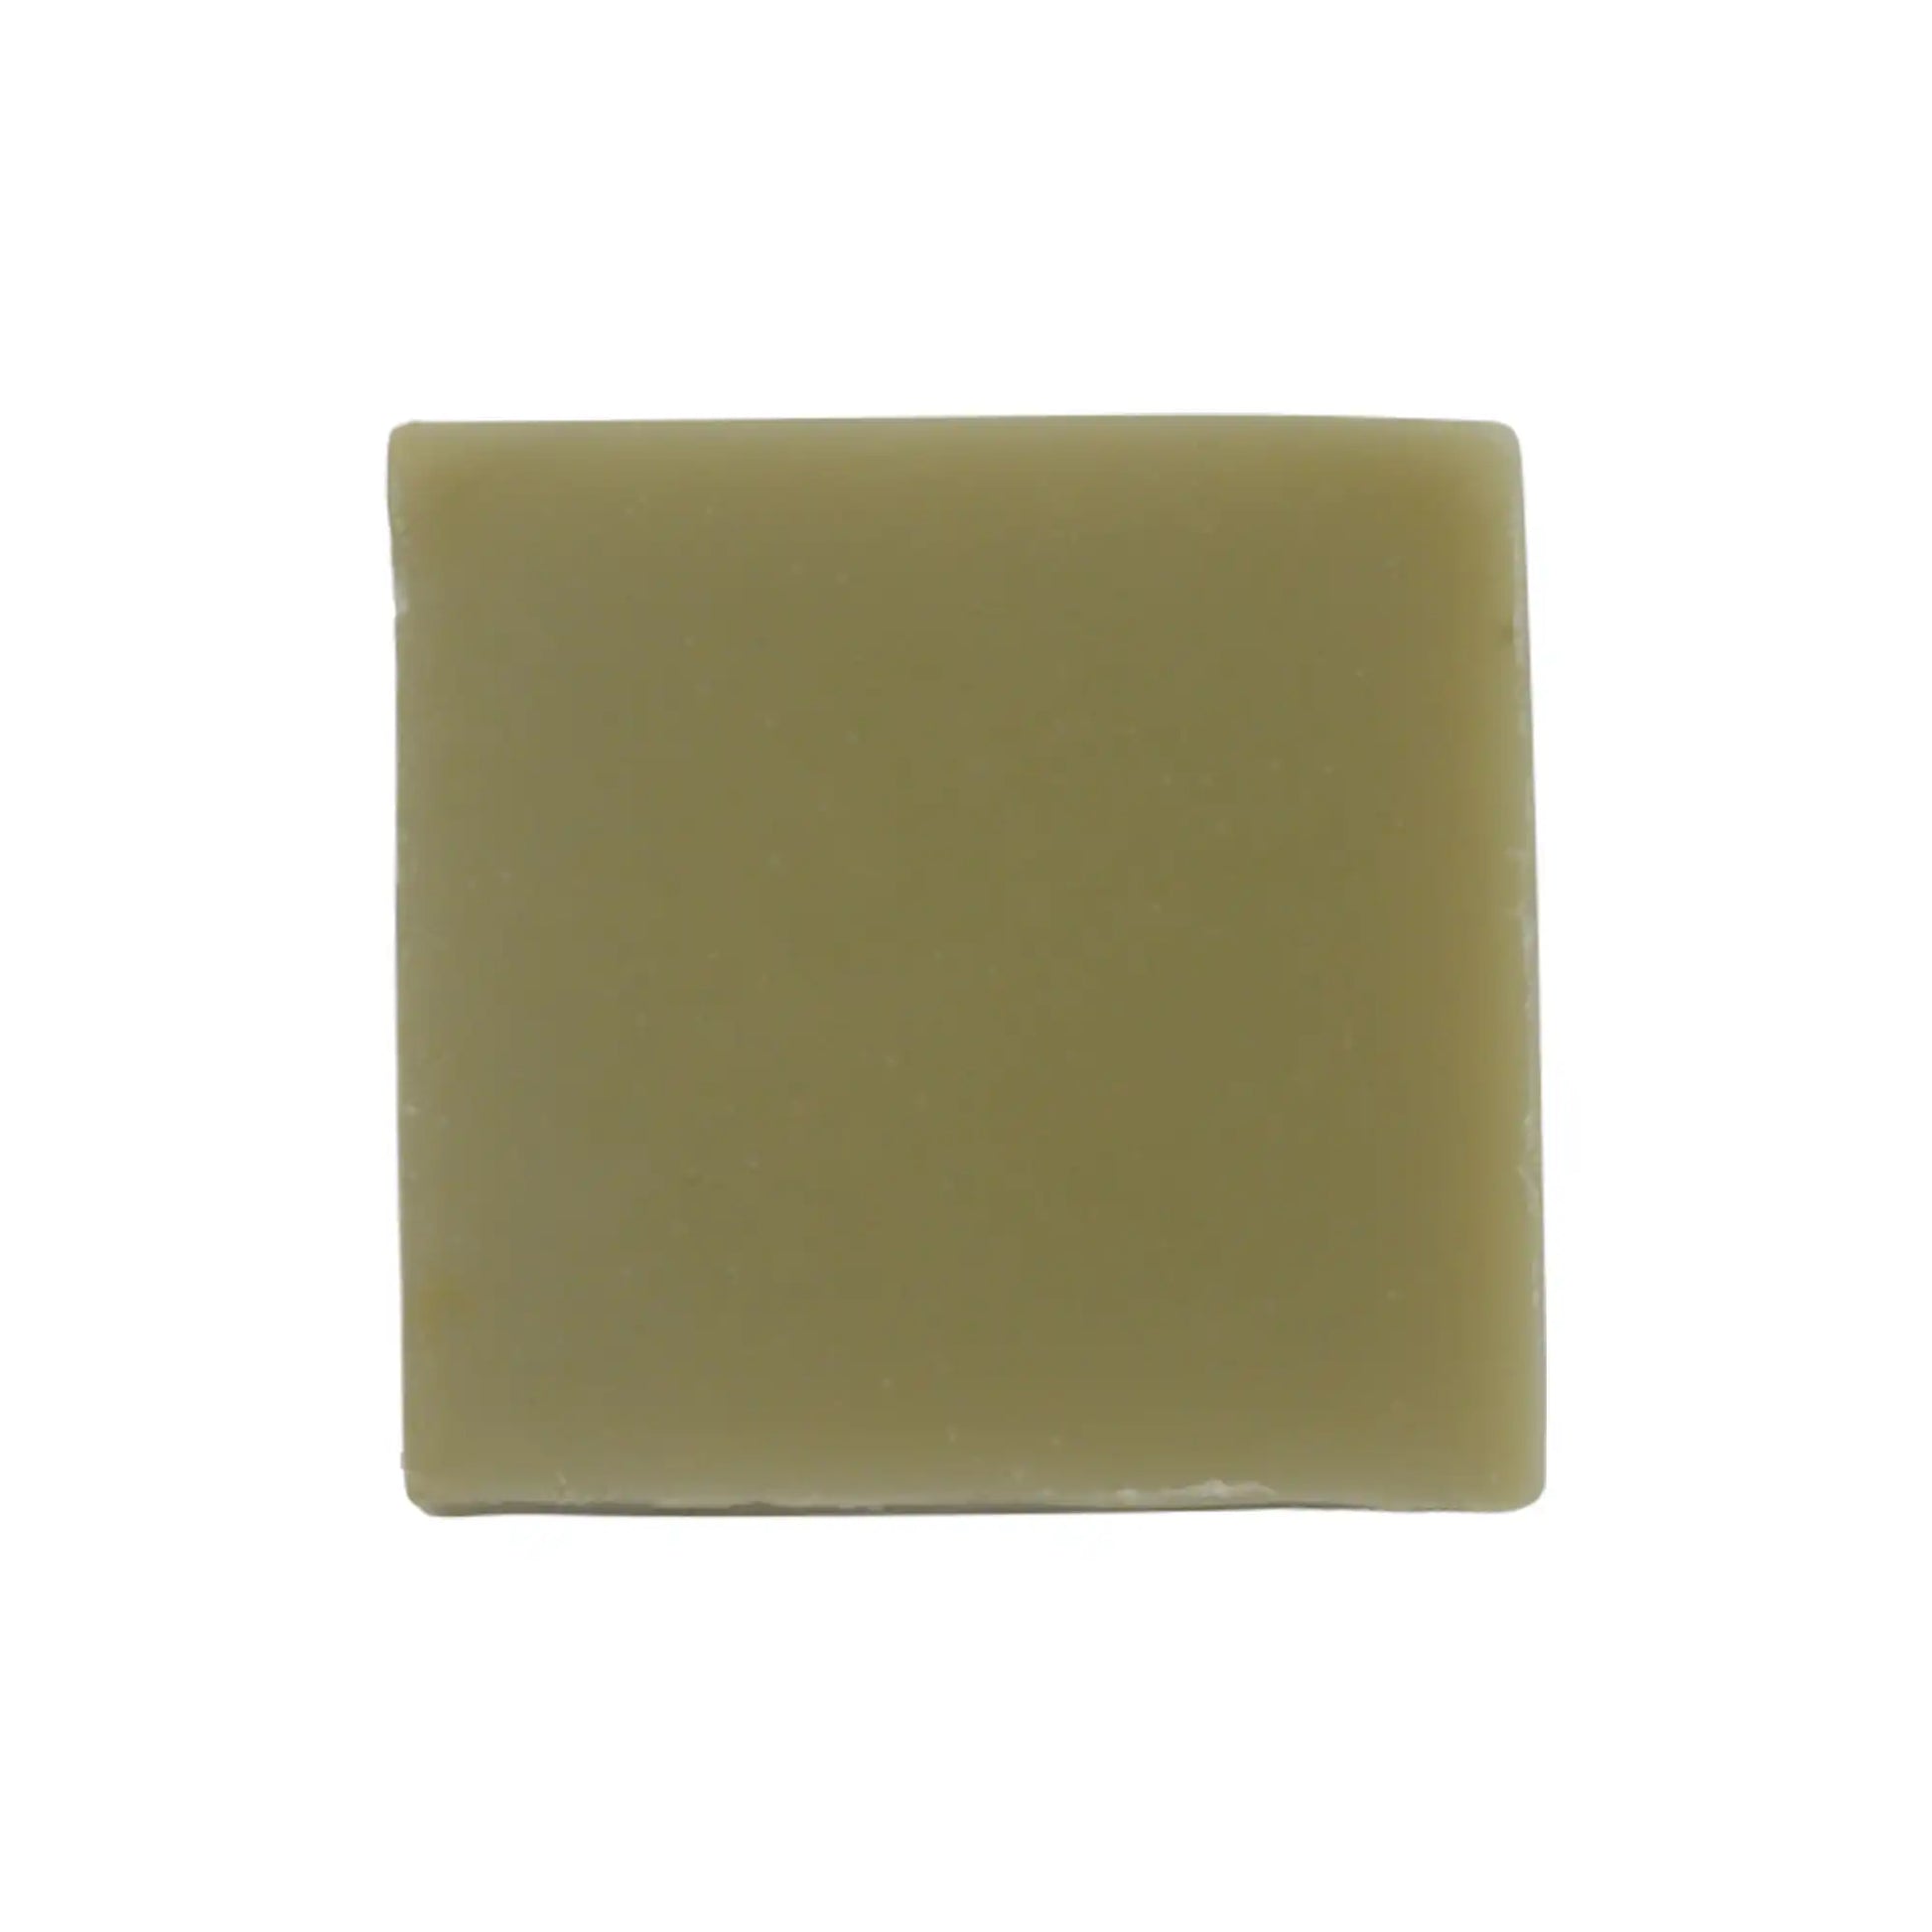 Discover the rejuvenating power of Green Tea Lemongrass Soap from Cruisin Organics. This all-natural soap bar combines green tea and lemongrass oils to detoxify, repair, and refresh your skin. Say goodbye to excess grease and oil and hello to a calming and anti-aging experience. Let the invigorating scent of lemongrass essential oil revitalize you.